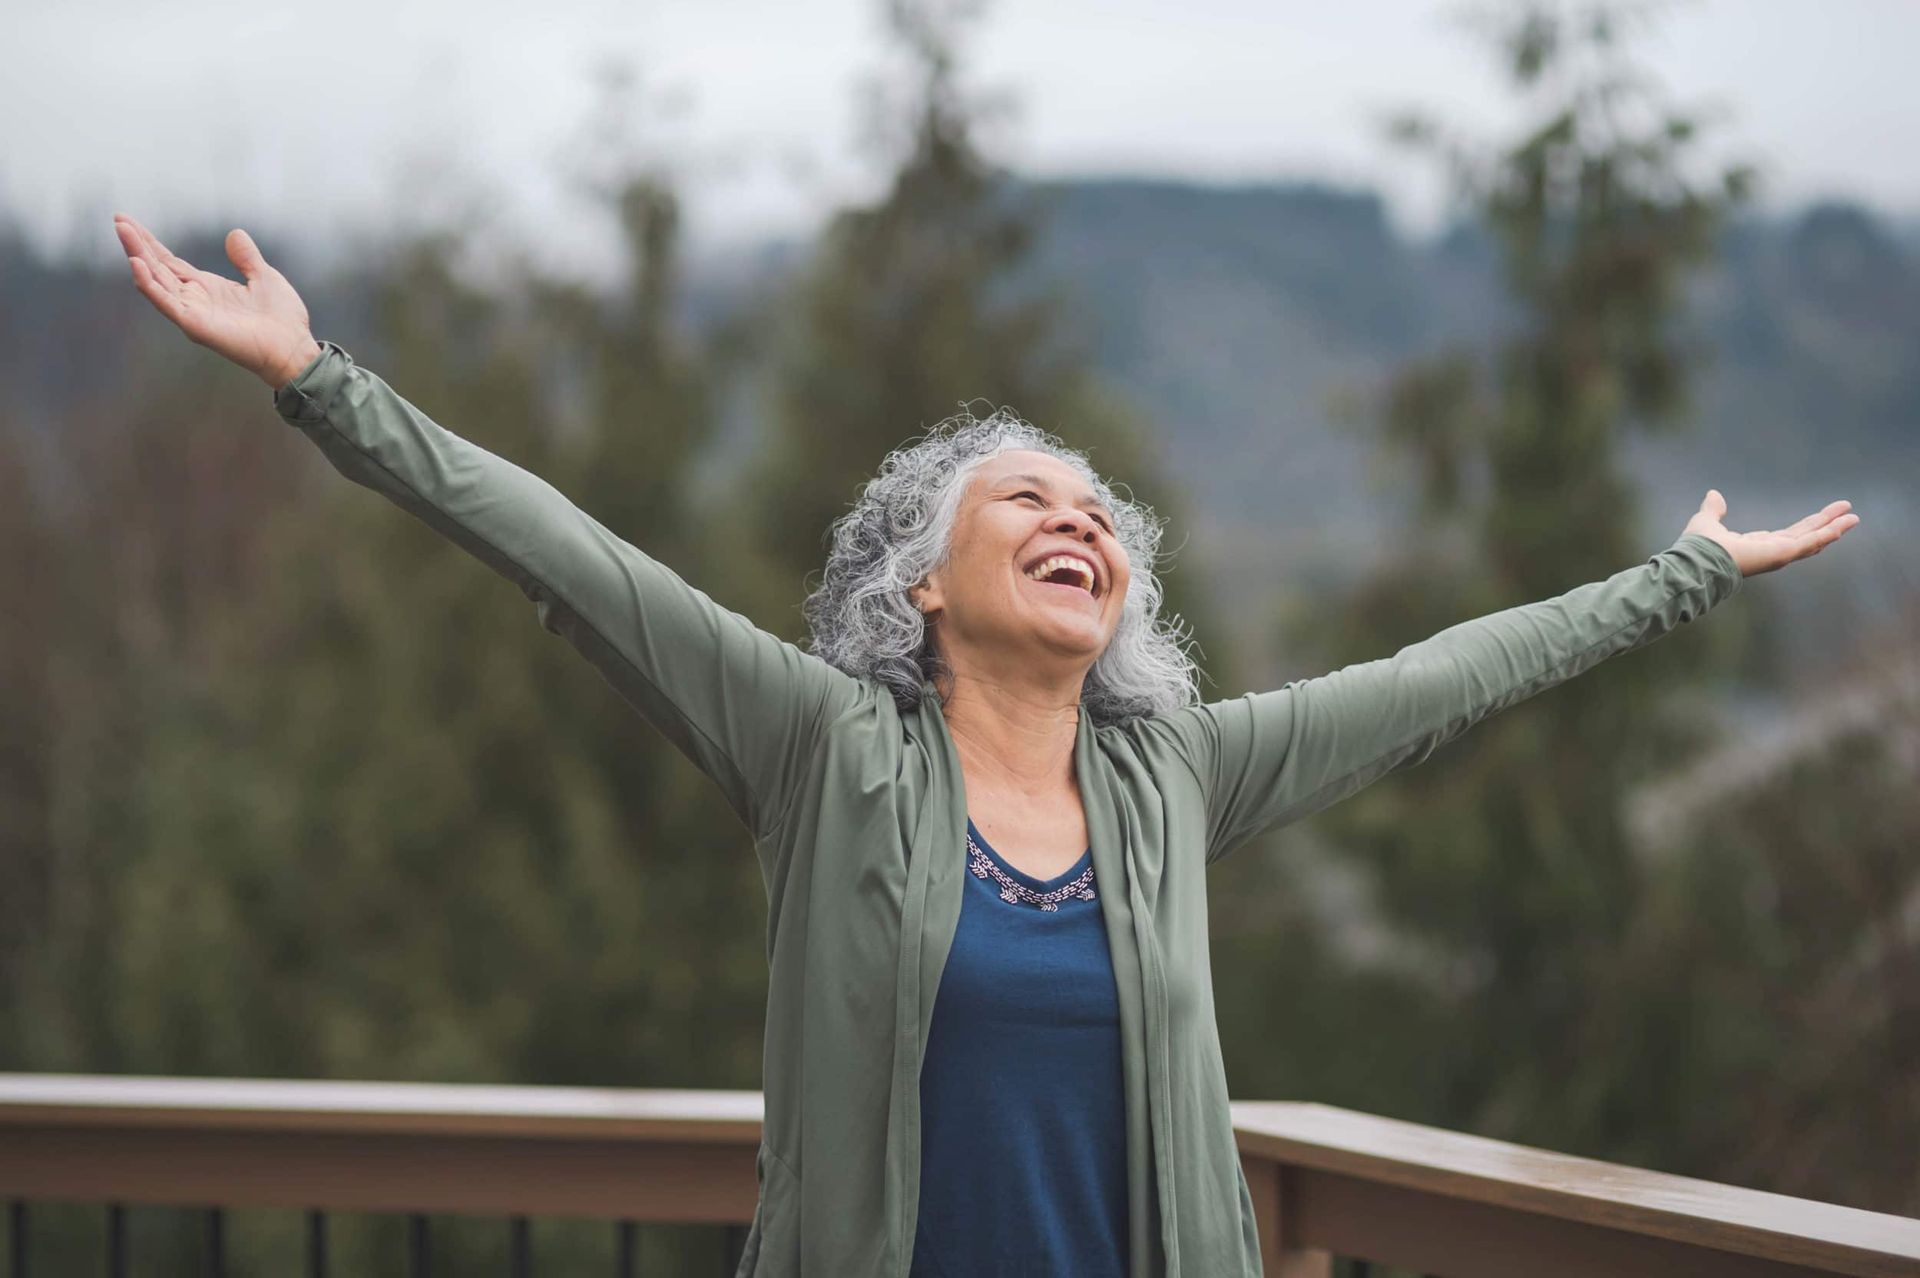 A woman with her arms outstretched - Regenerative therapy can help with COPD, chronic knee, back, neck, hip, shoulder pain, osteoarthritis, arthritis, and other joint pain.